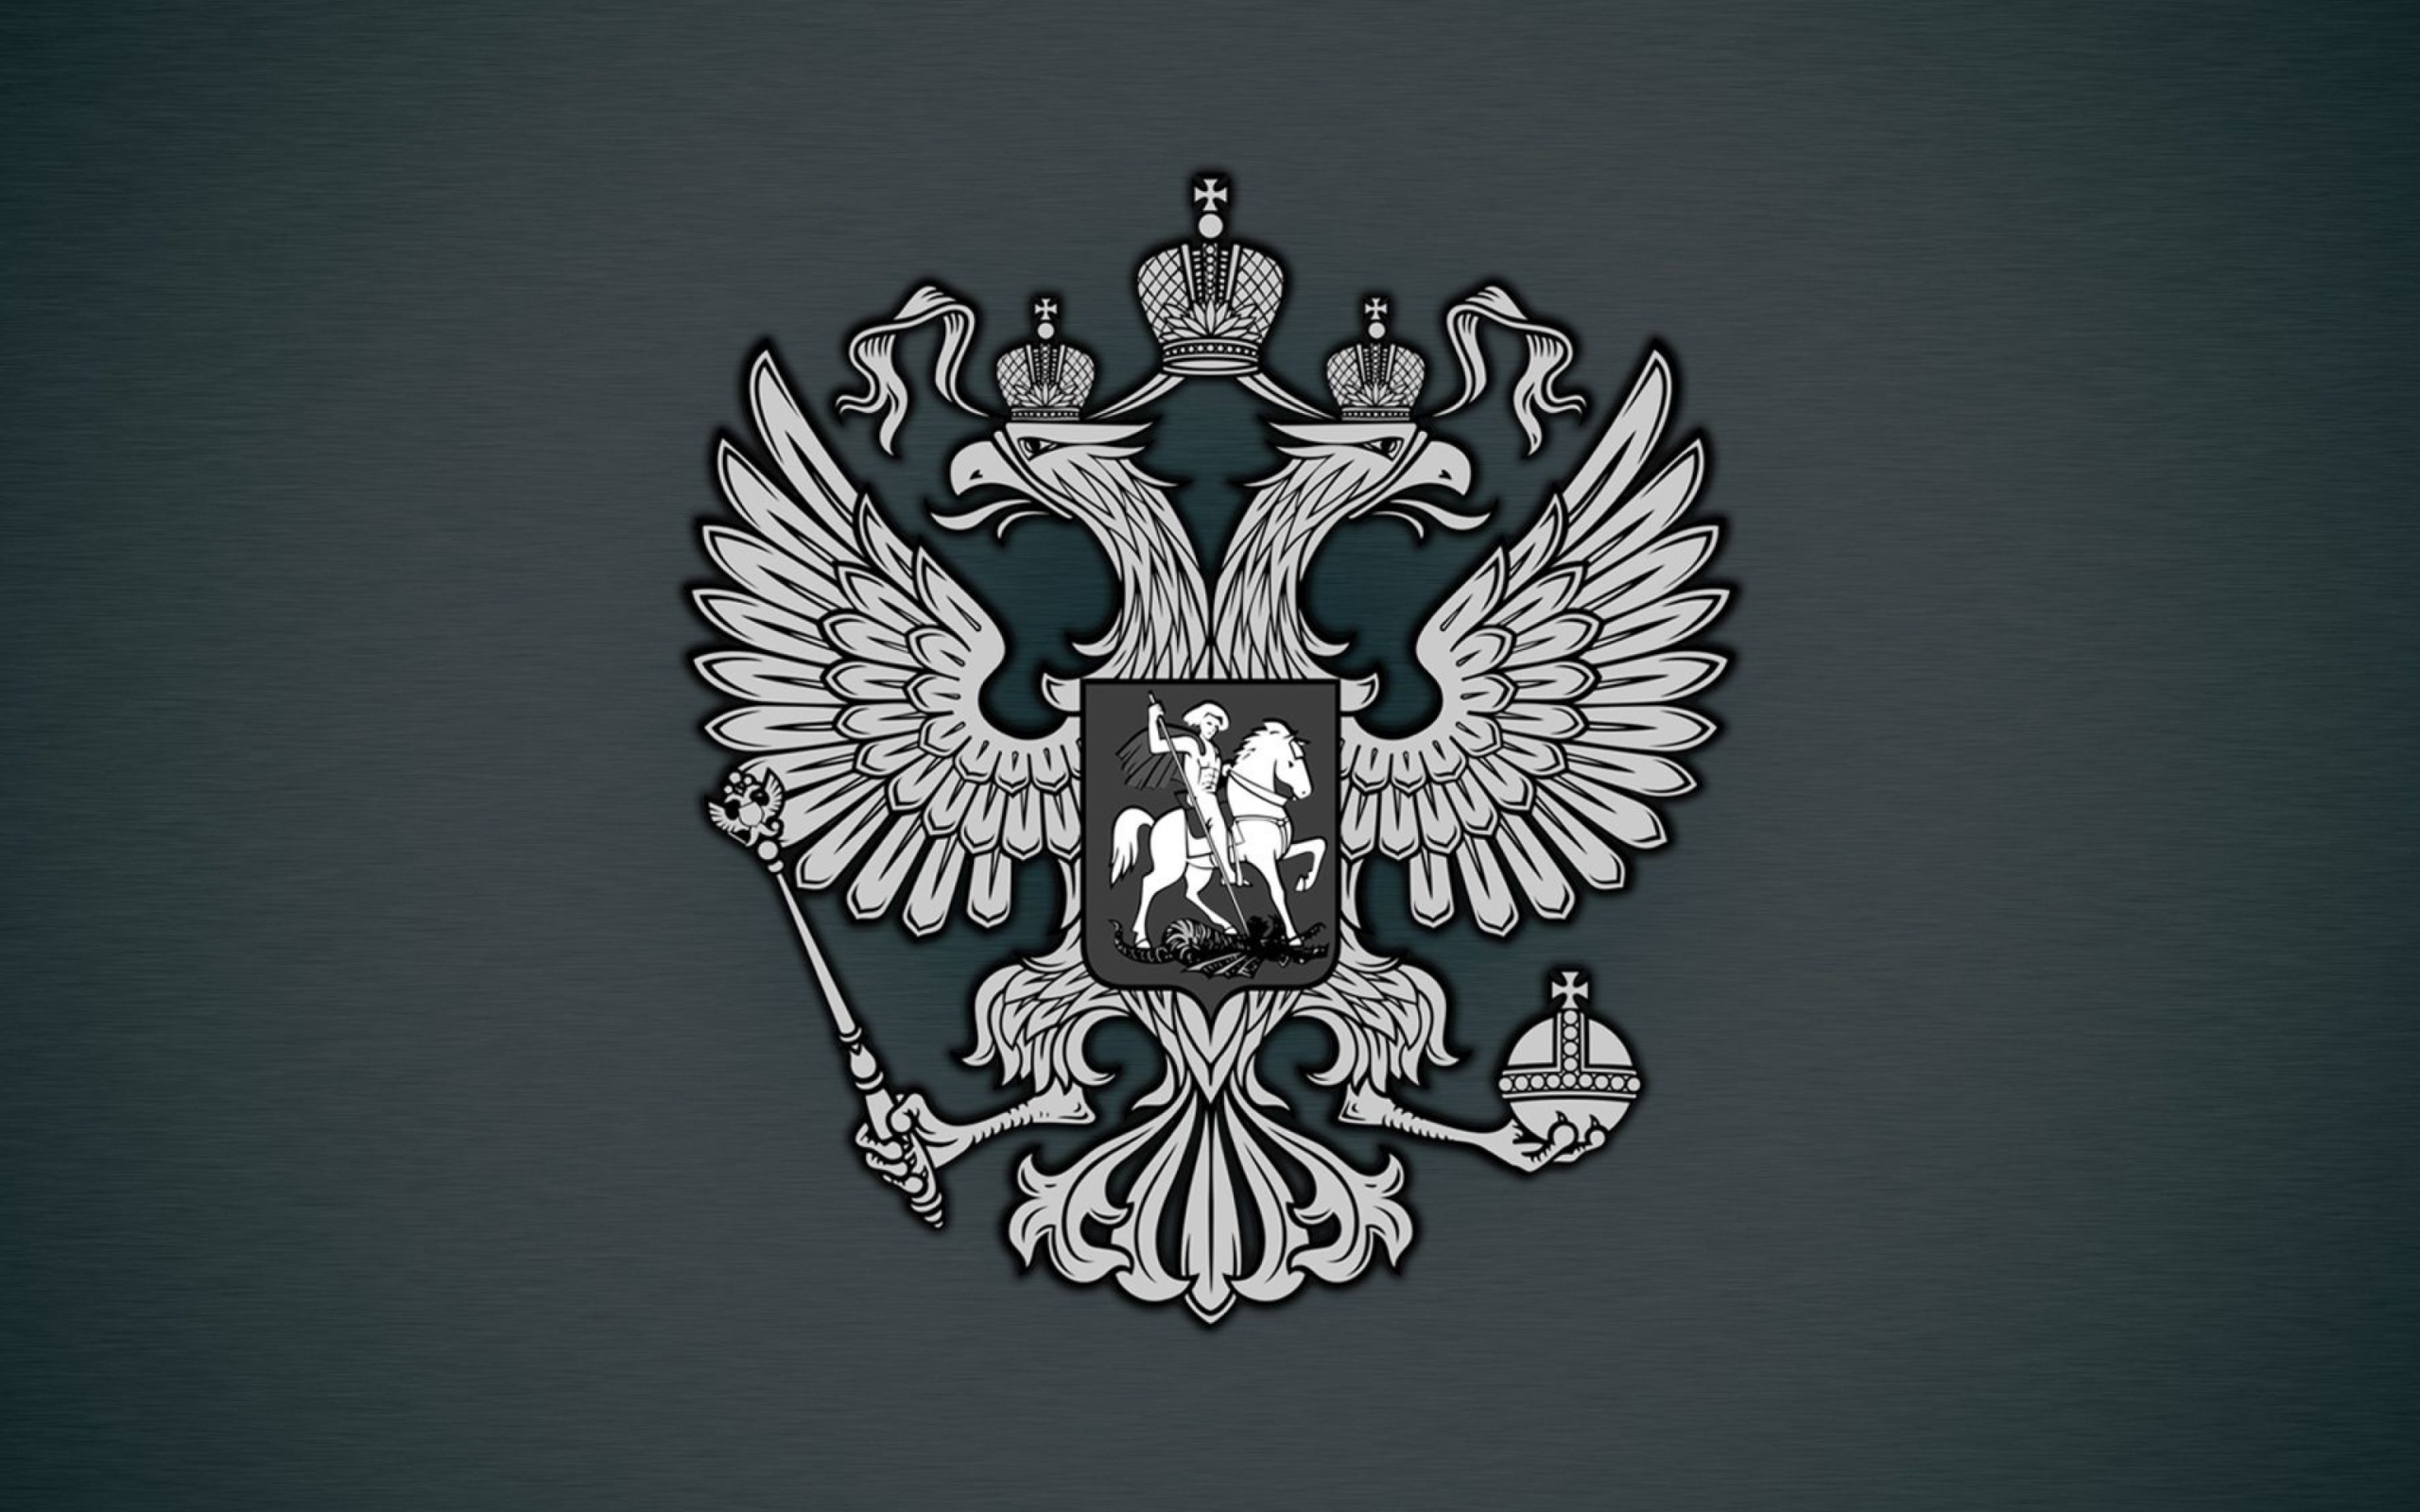 Das Coat of arms of Russia Wallpaper 2560x1600